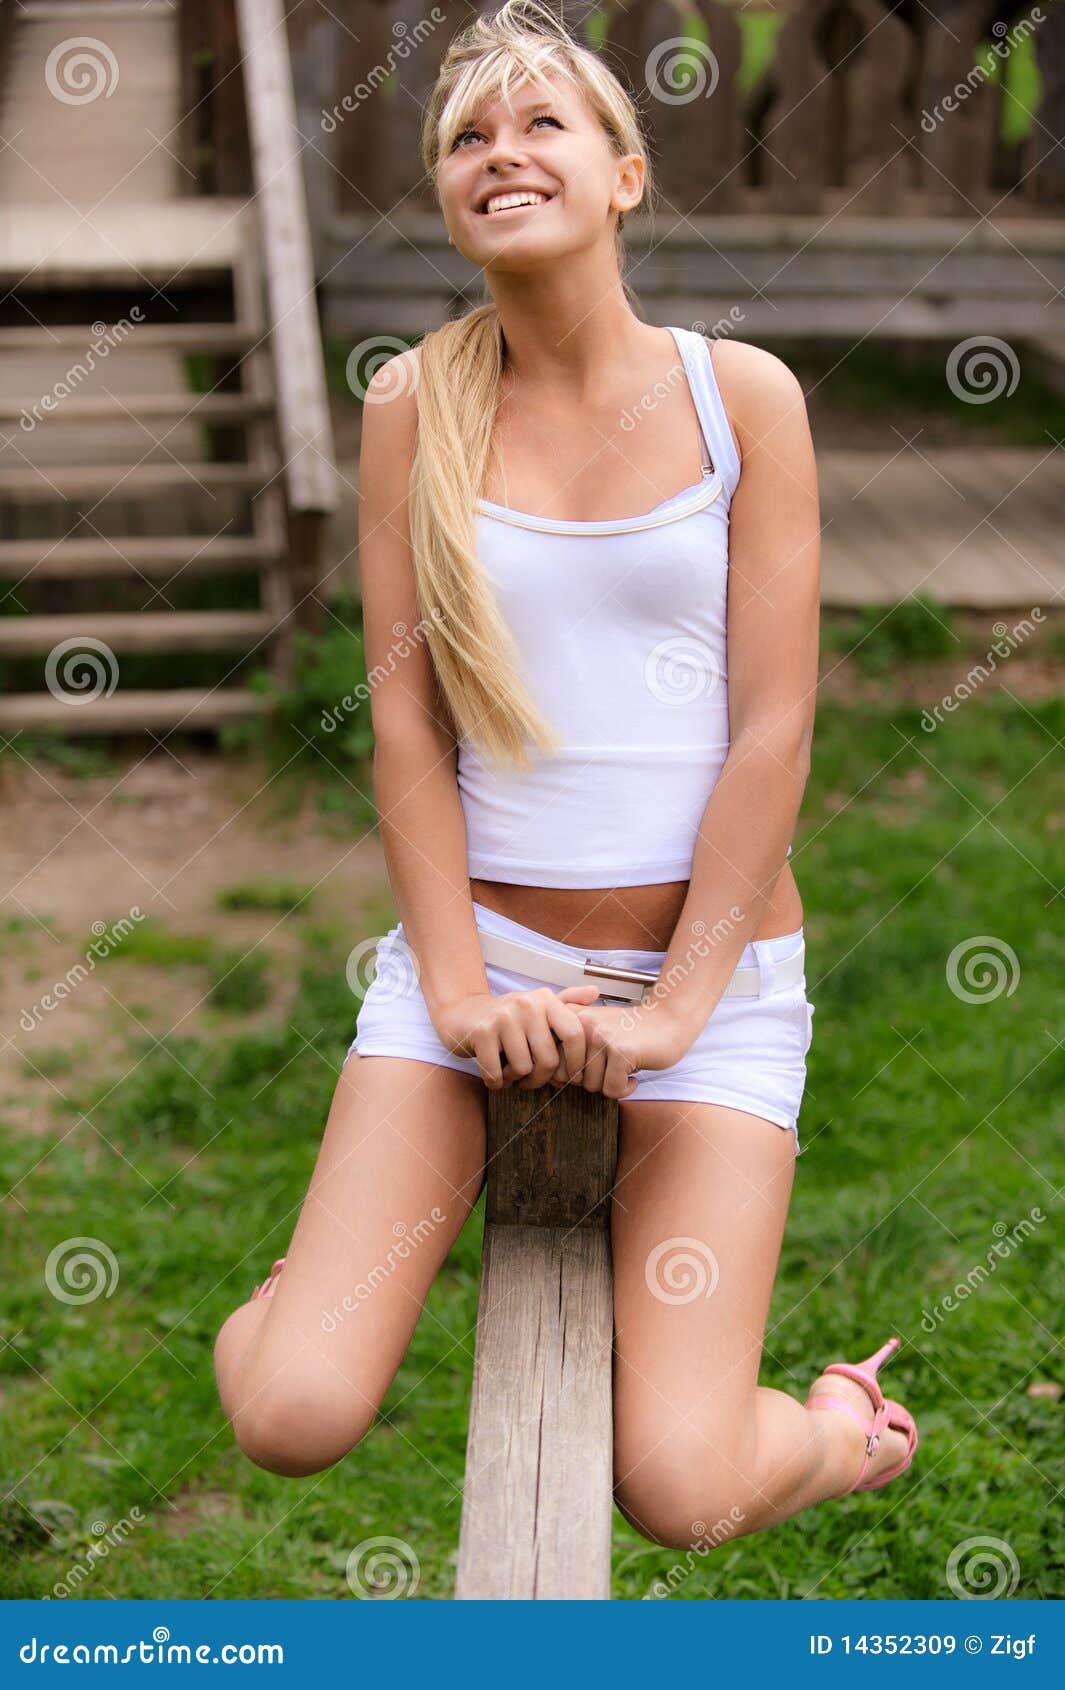 young woman shakes on seesaw